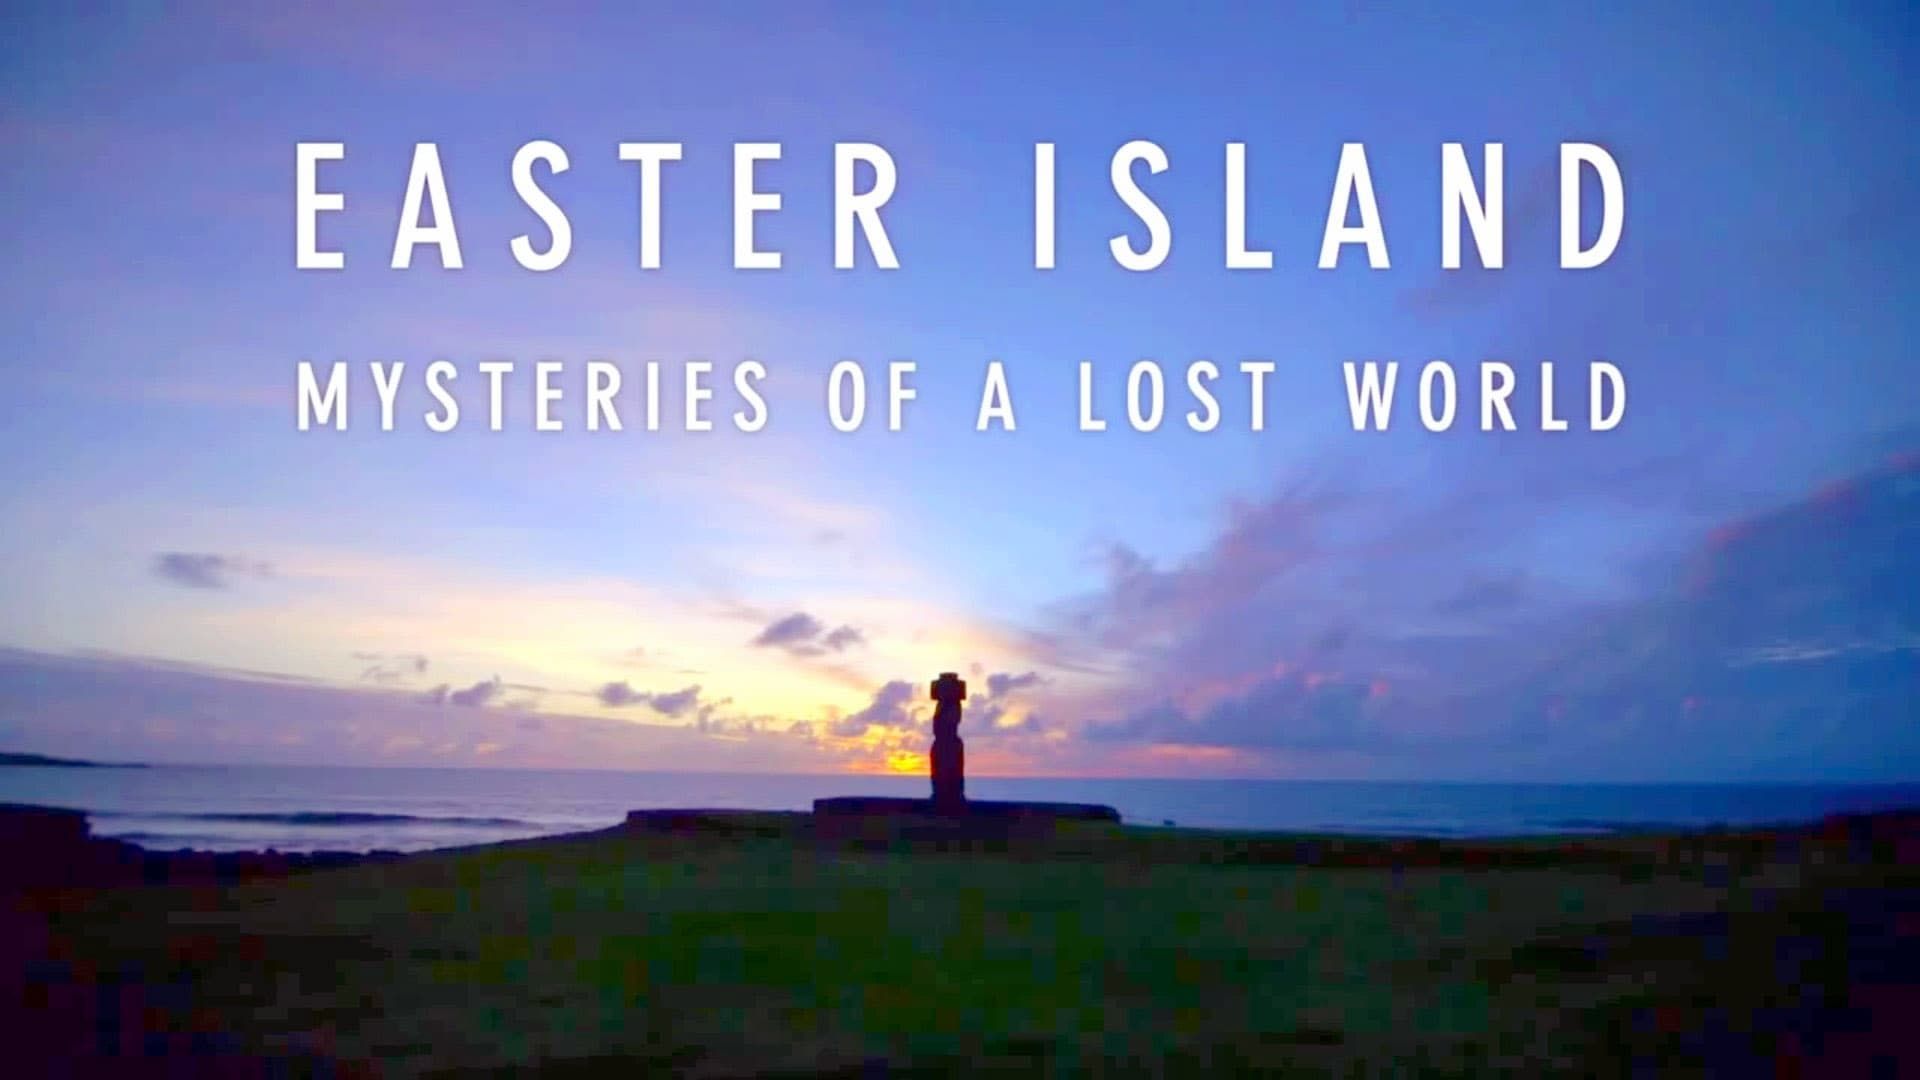 Easter Island: Mysteries of a Lost World background